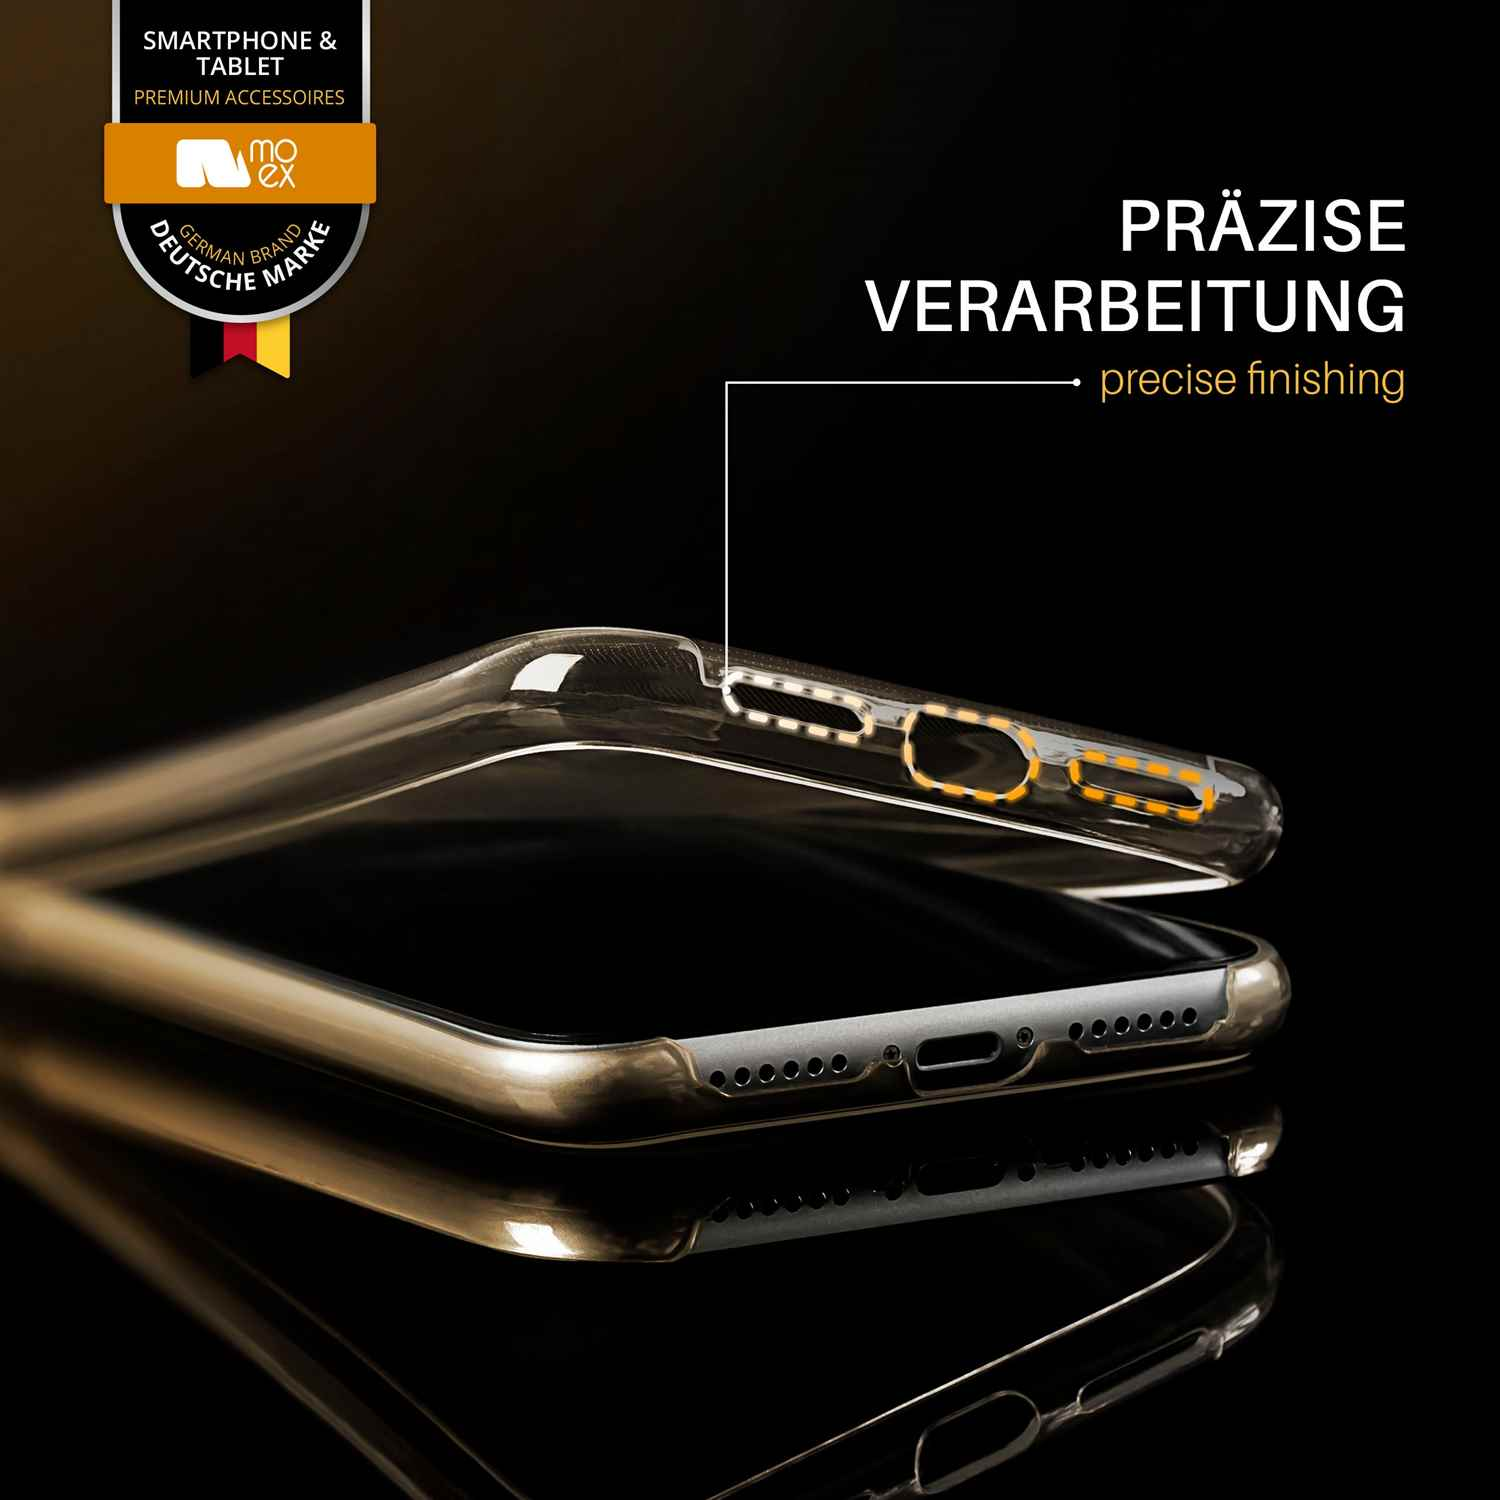 MOEX Double Cover, Gold Galaxy Samsung, Case, S7, Full